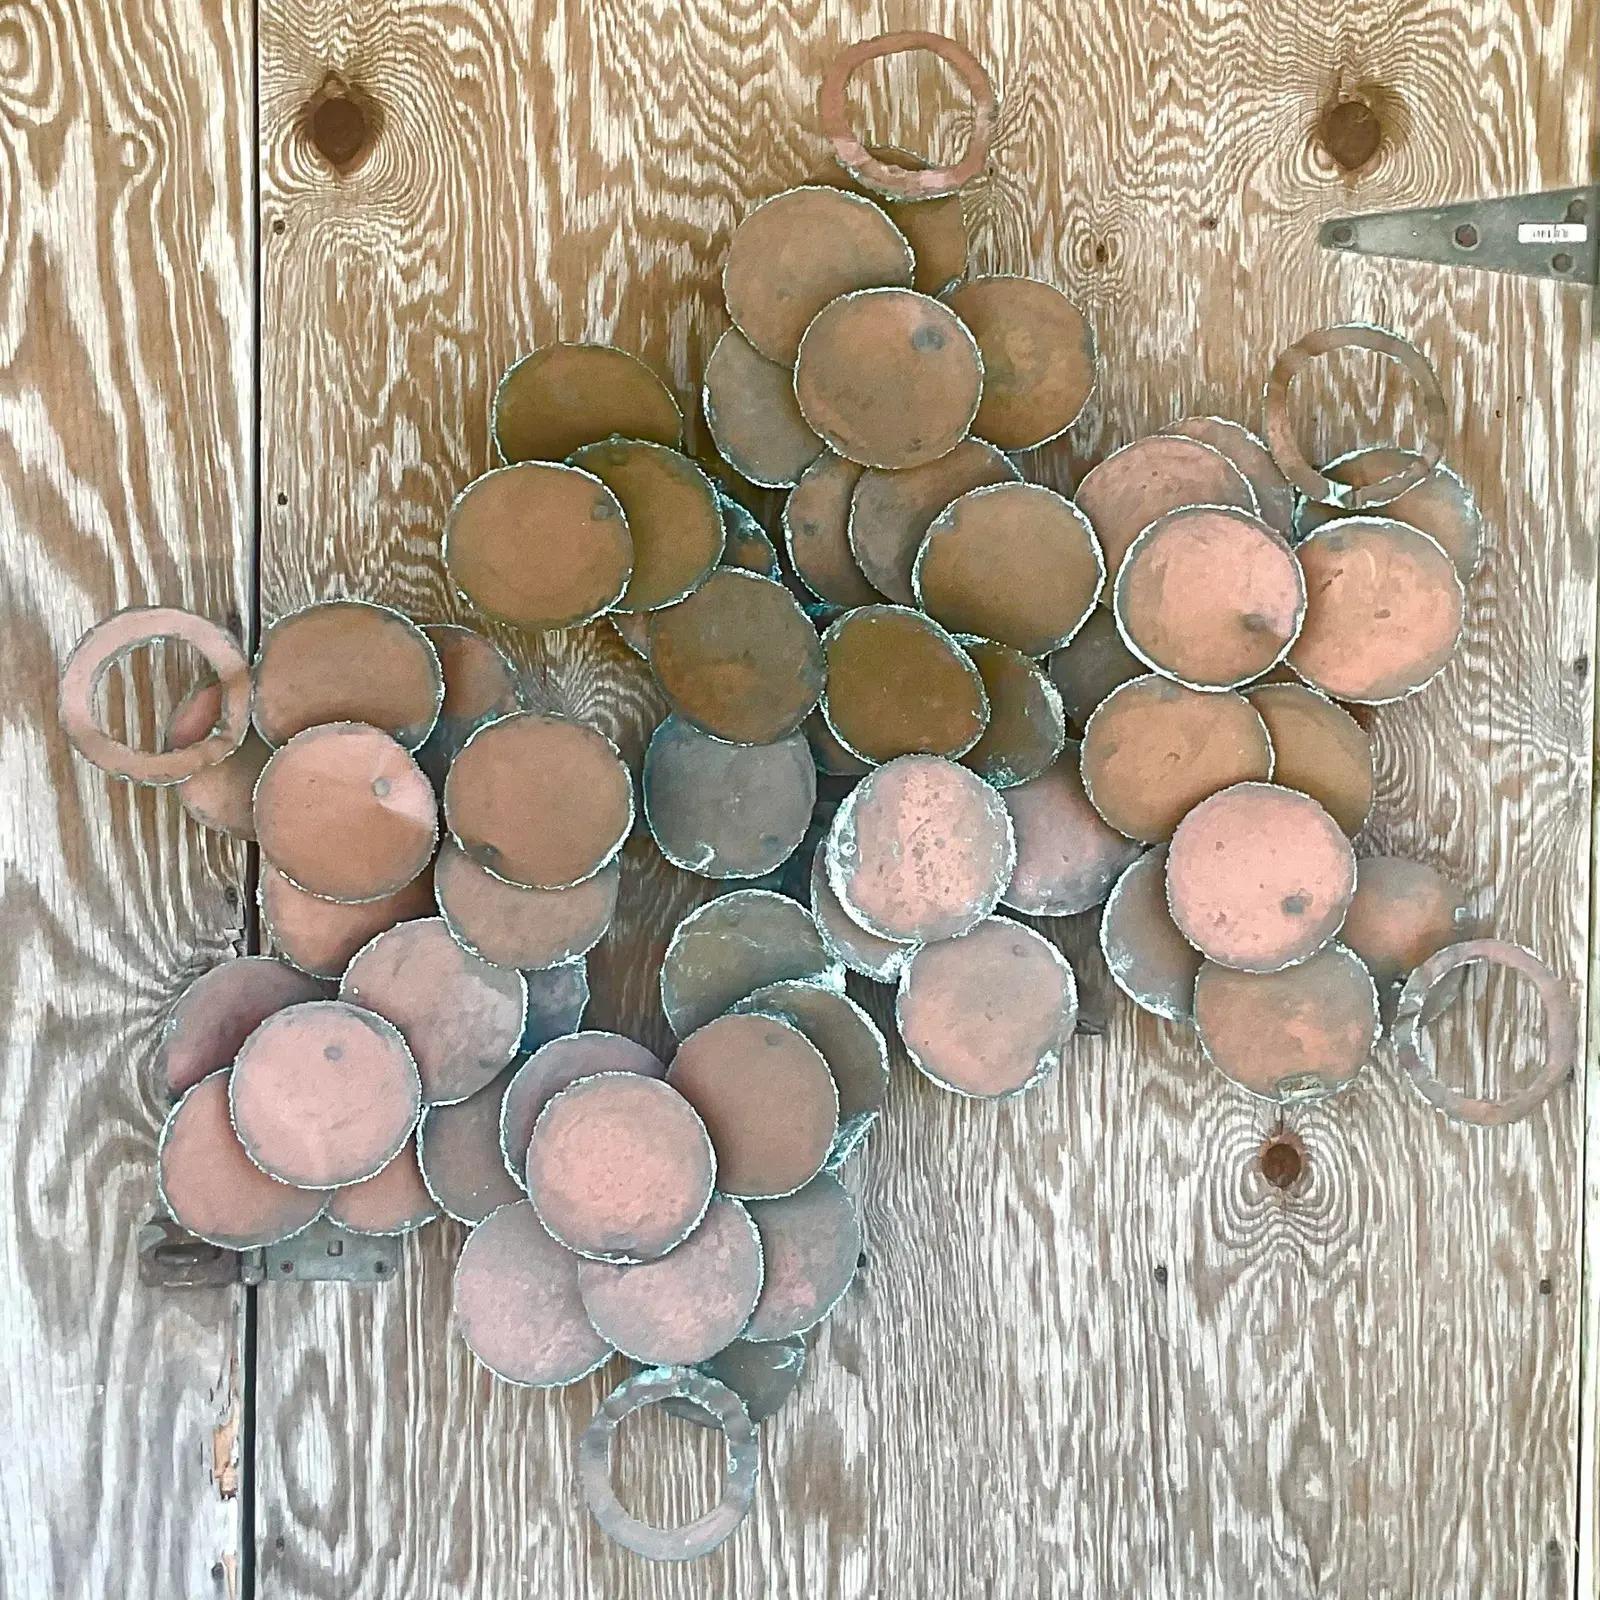 Fabulous vintage MCM wall sculpture. Torch cut copper discs arranged in the Brutalist style. Lots of movement and energy. Signed by the artist William Friedle. Acquired from a Palm Beach estate.